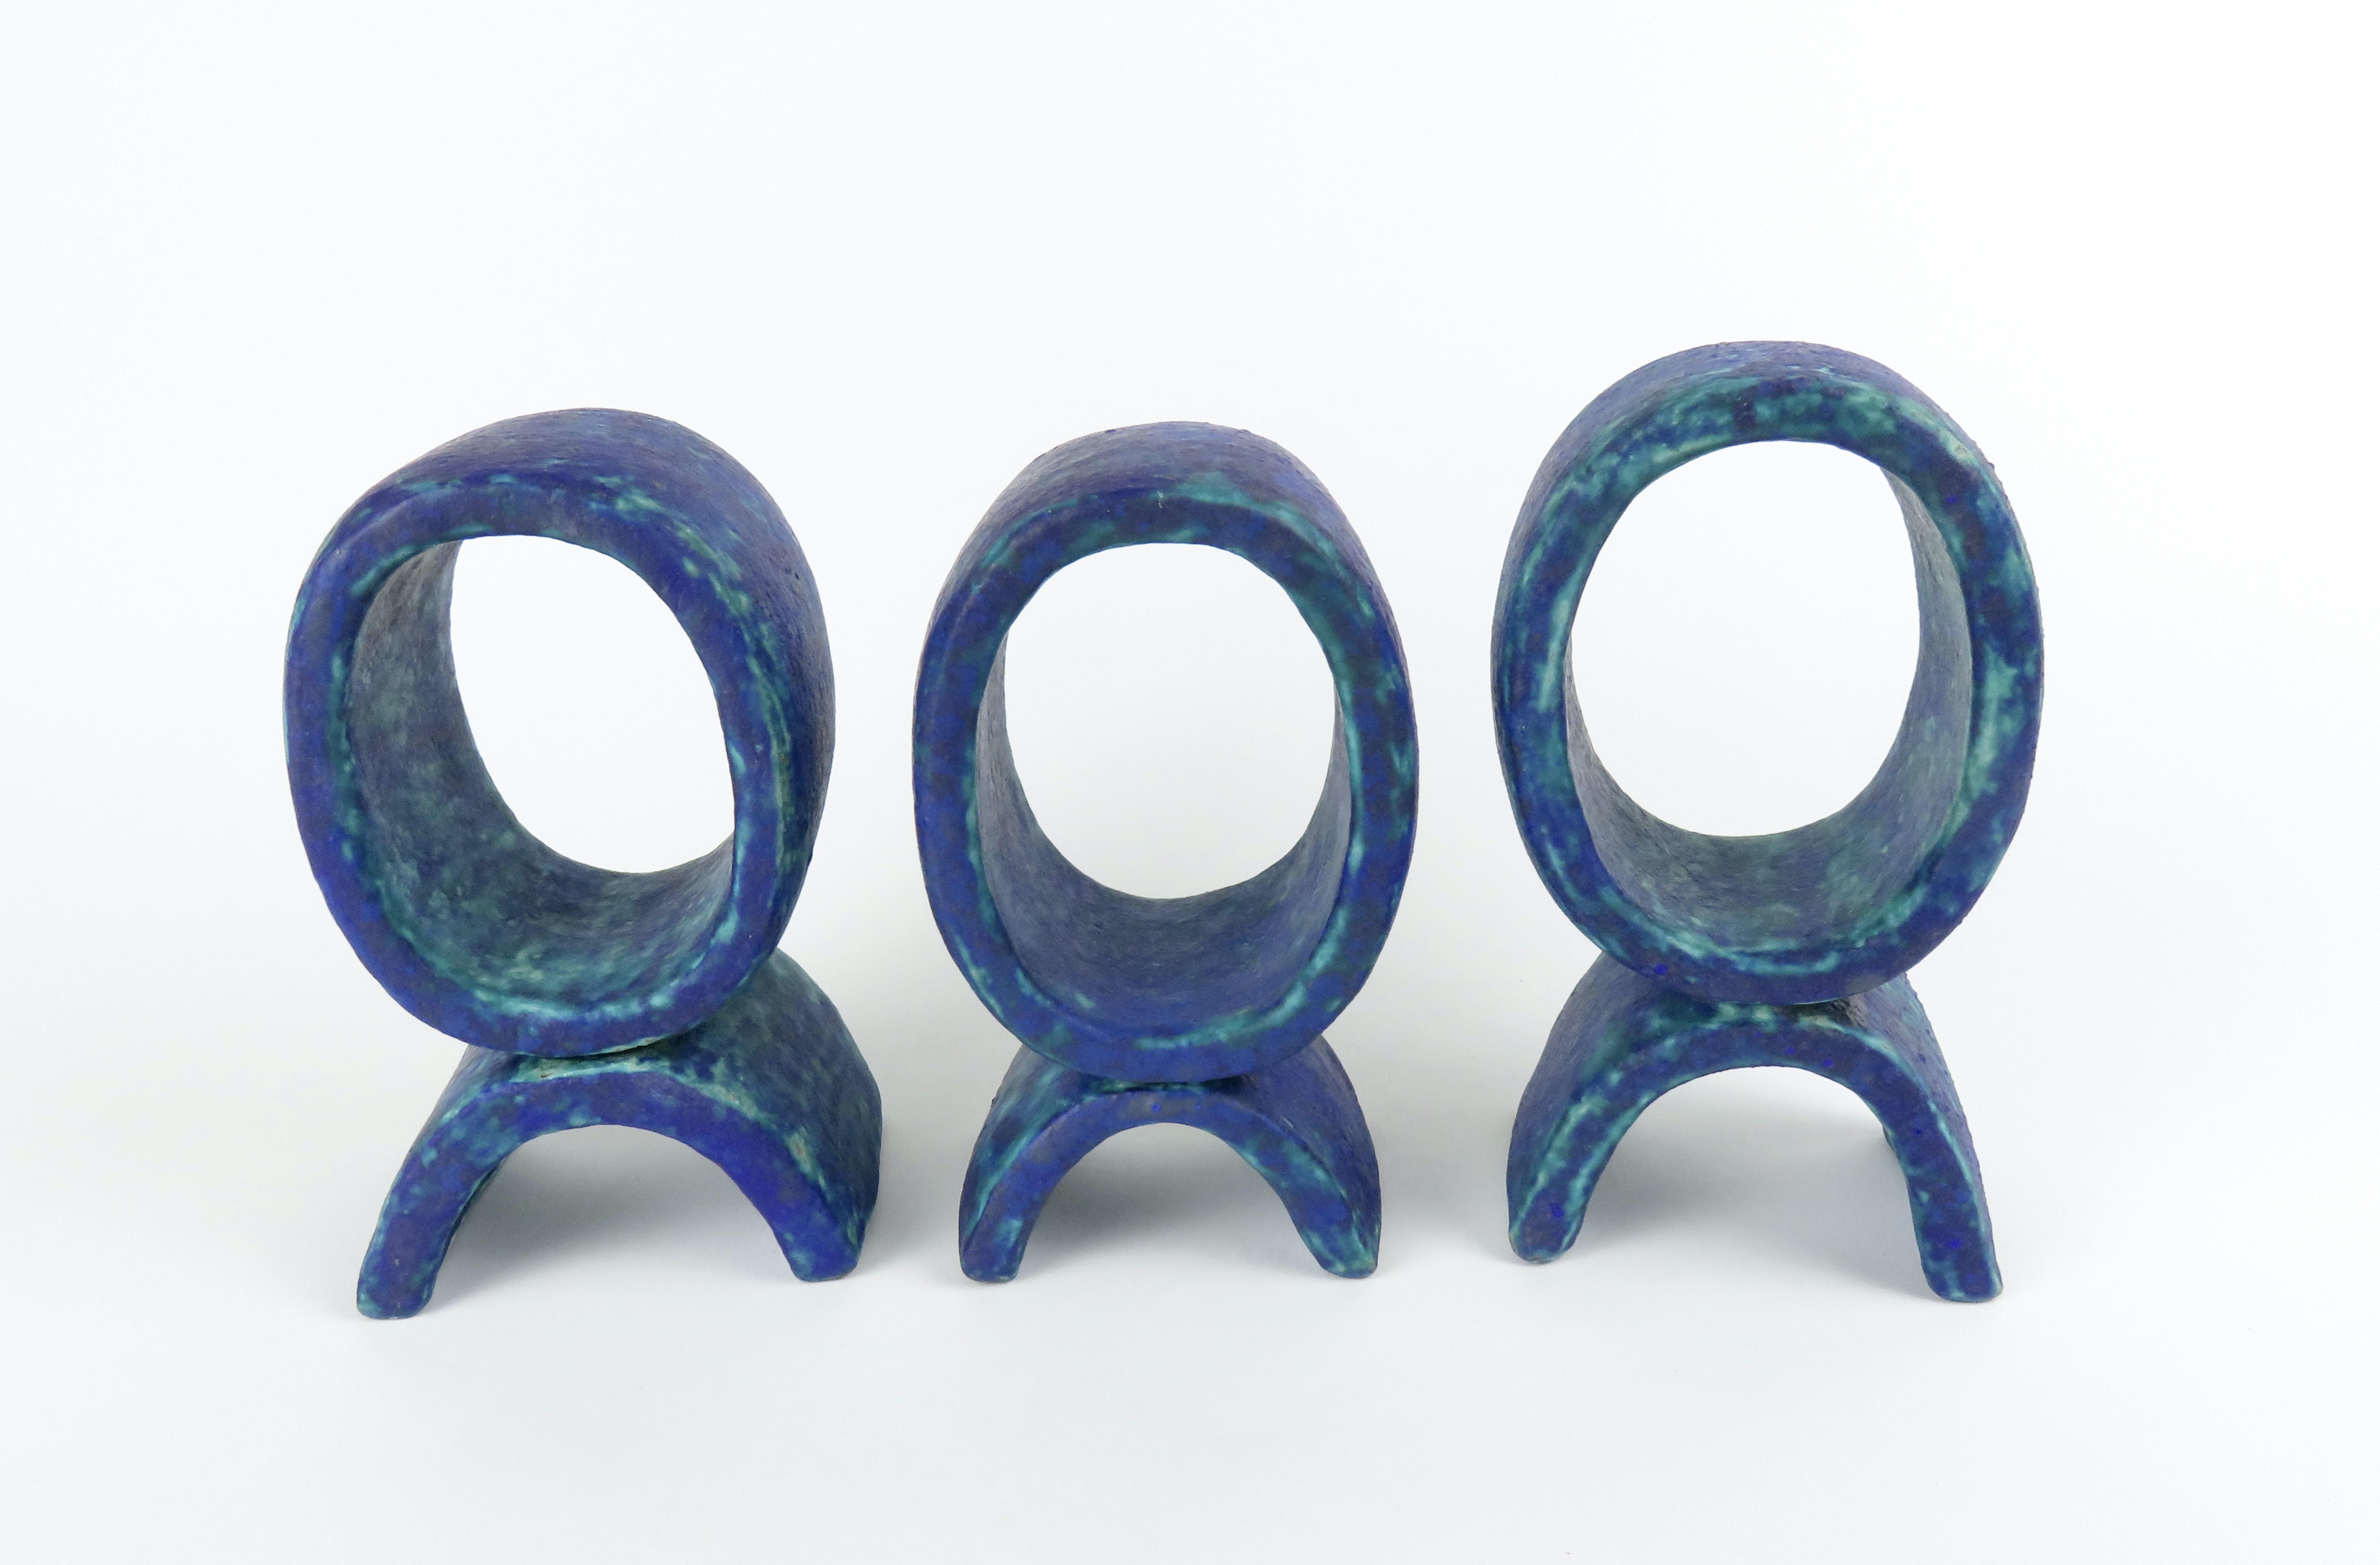 Three small Ceramic Totems in Mottled Turquoise and Dark Blue. They each consist of a single vertical ring on a small curved leg. Each part is hand built in ceramic stoneware, attached together and fired twice. The tallest is 5 7/8 inches